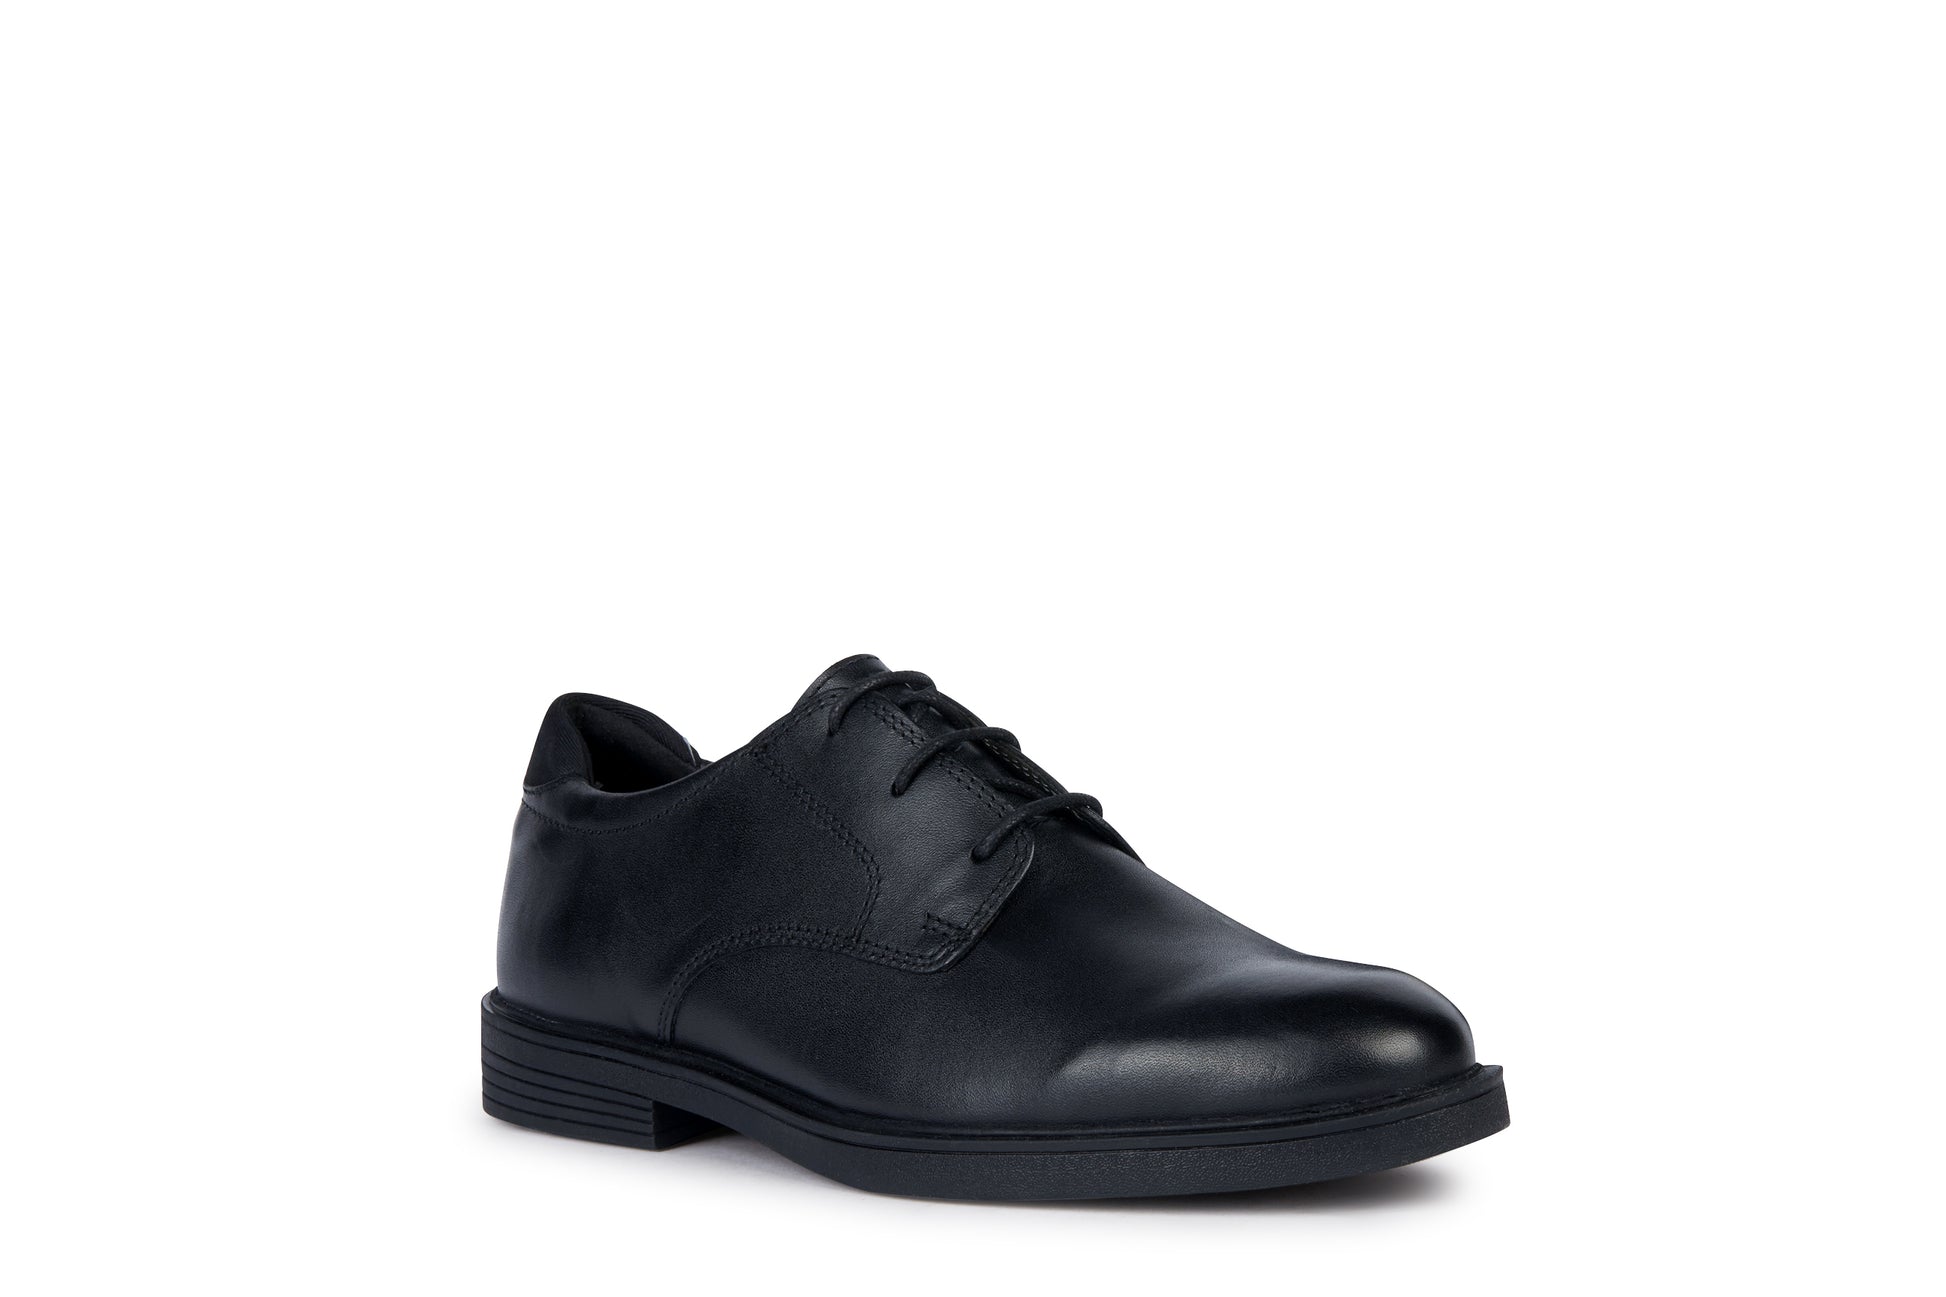 A senior boys school shoe by Geox, style Zheeno, lace-up in black leather. Angled view.